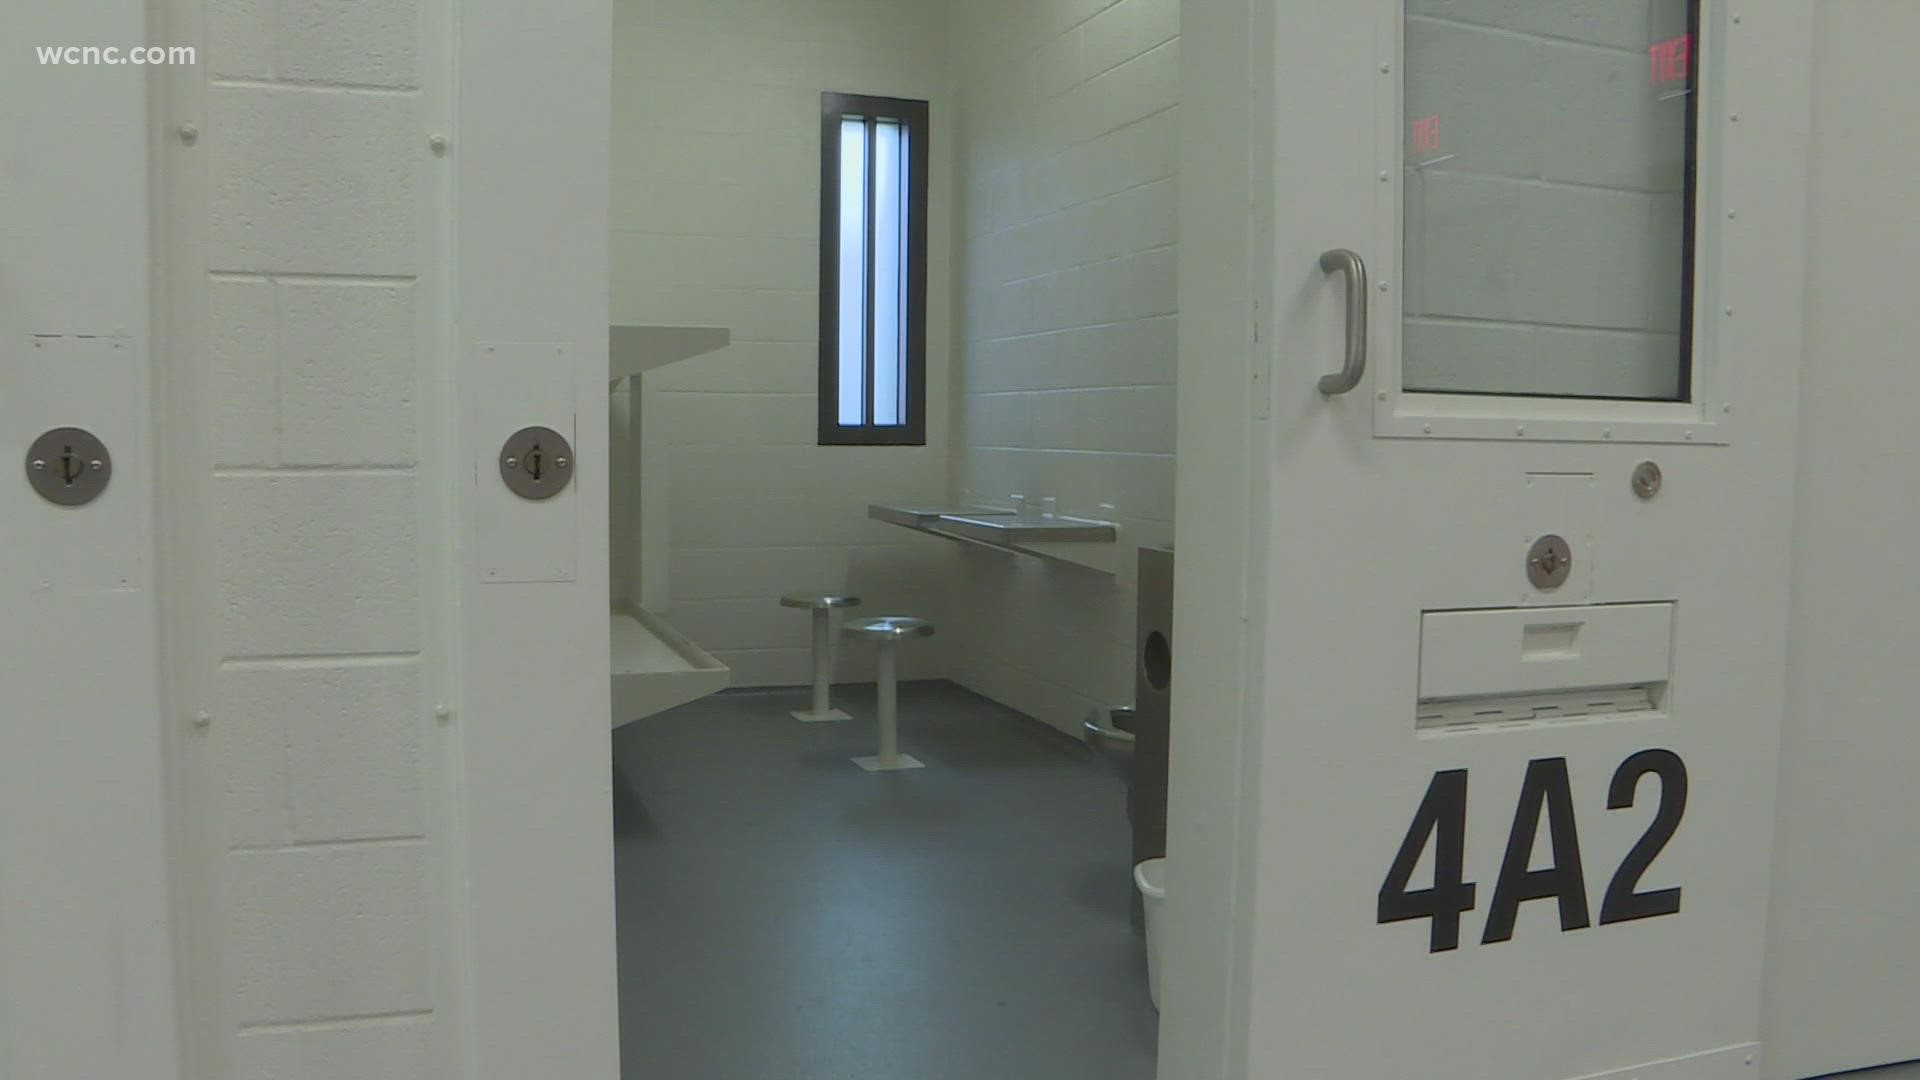 MCSO is spending thousands of dollars to transport and house more than 100 detainees in detention centers across the state.